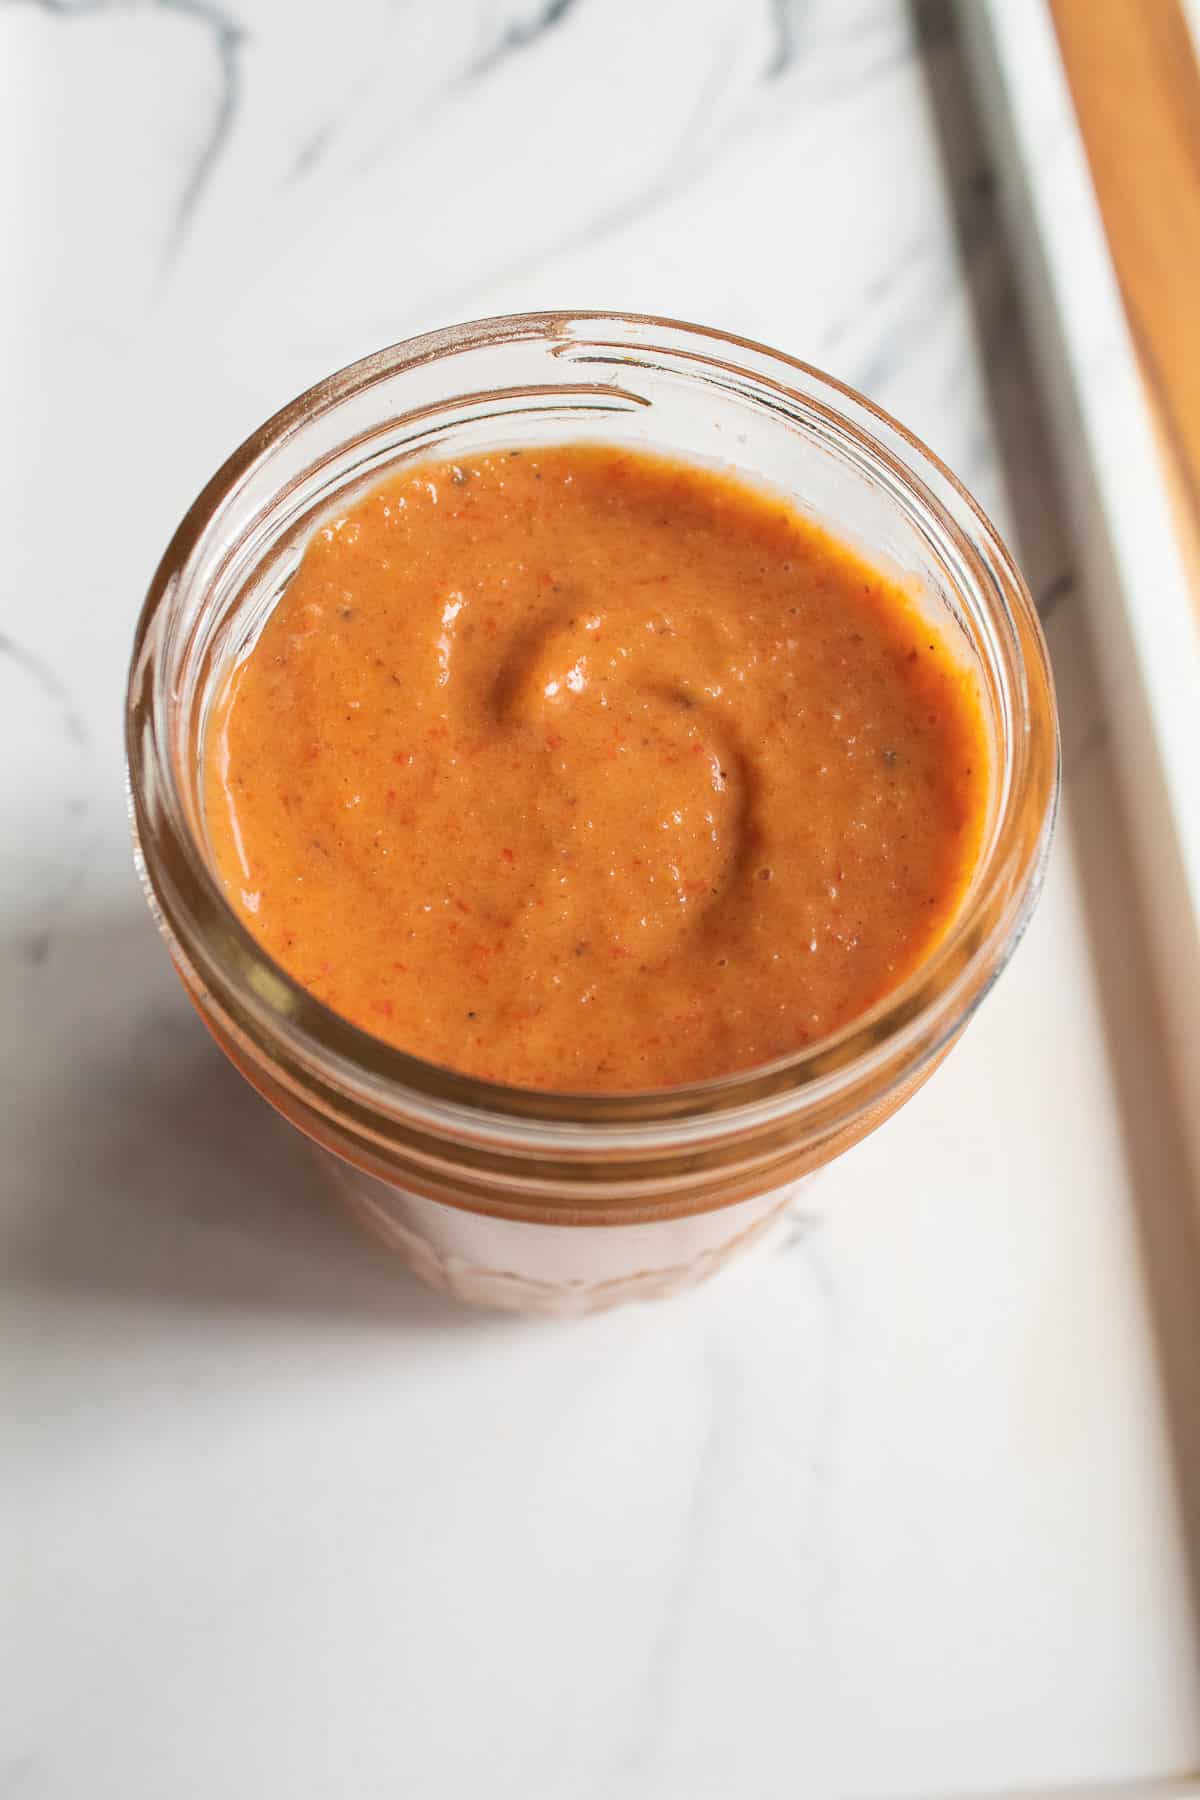 An reddish-orange dressing with specks of black pepper and roasted red pepper is stored in a glass jar.